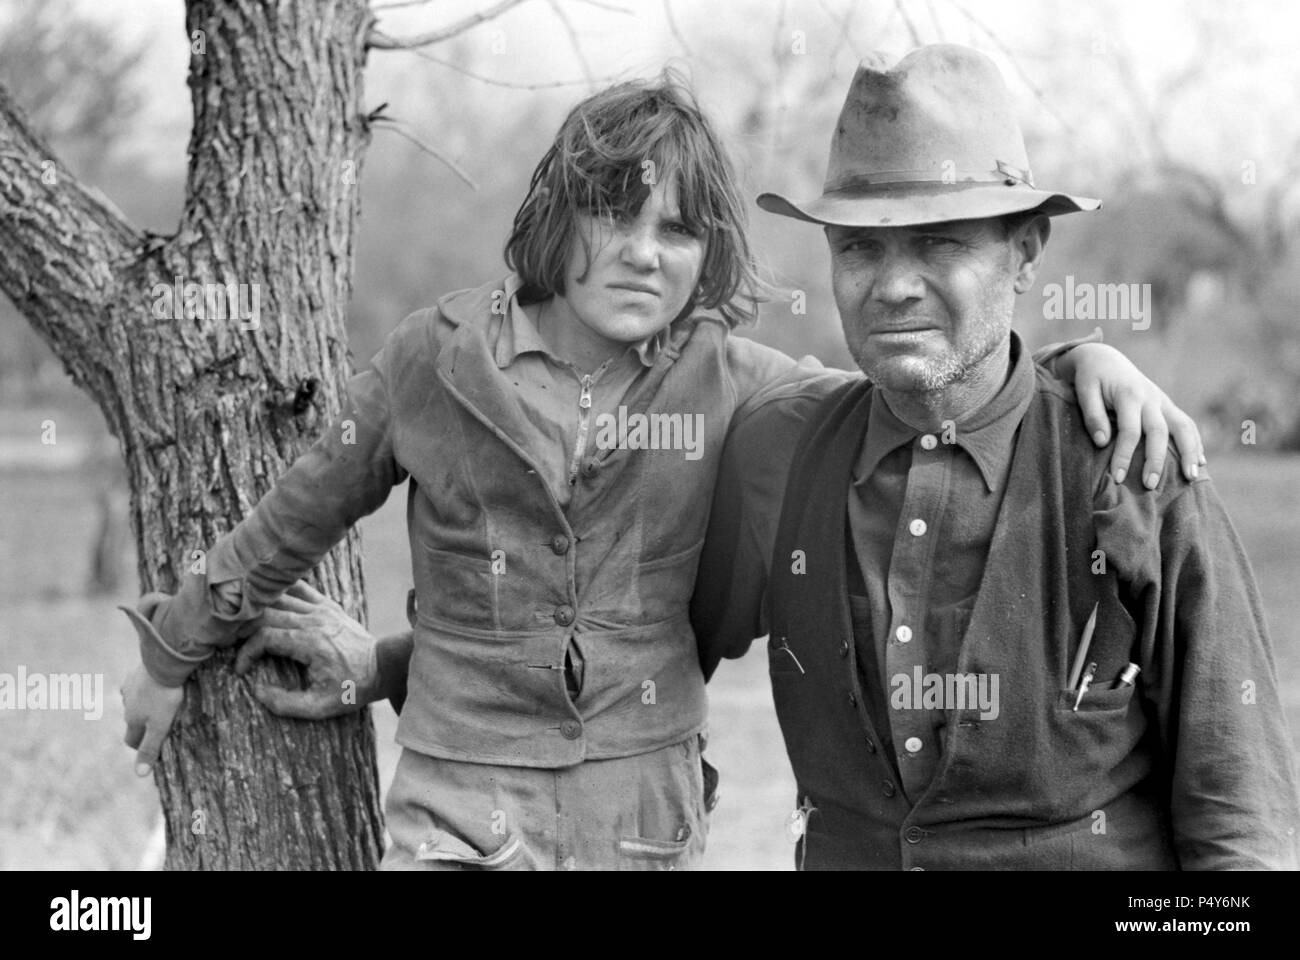 https://c8.alamy.com/comp/P4Y6NK/migrant-farmer-and-daughter-near-harlingen-texas-usa-russell-lee-farm-security-administration-february-1939-P4Y6NK.jpg